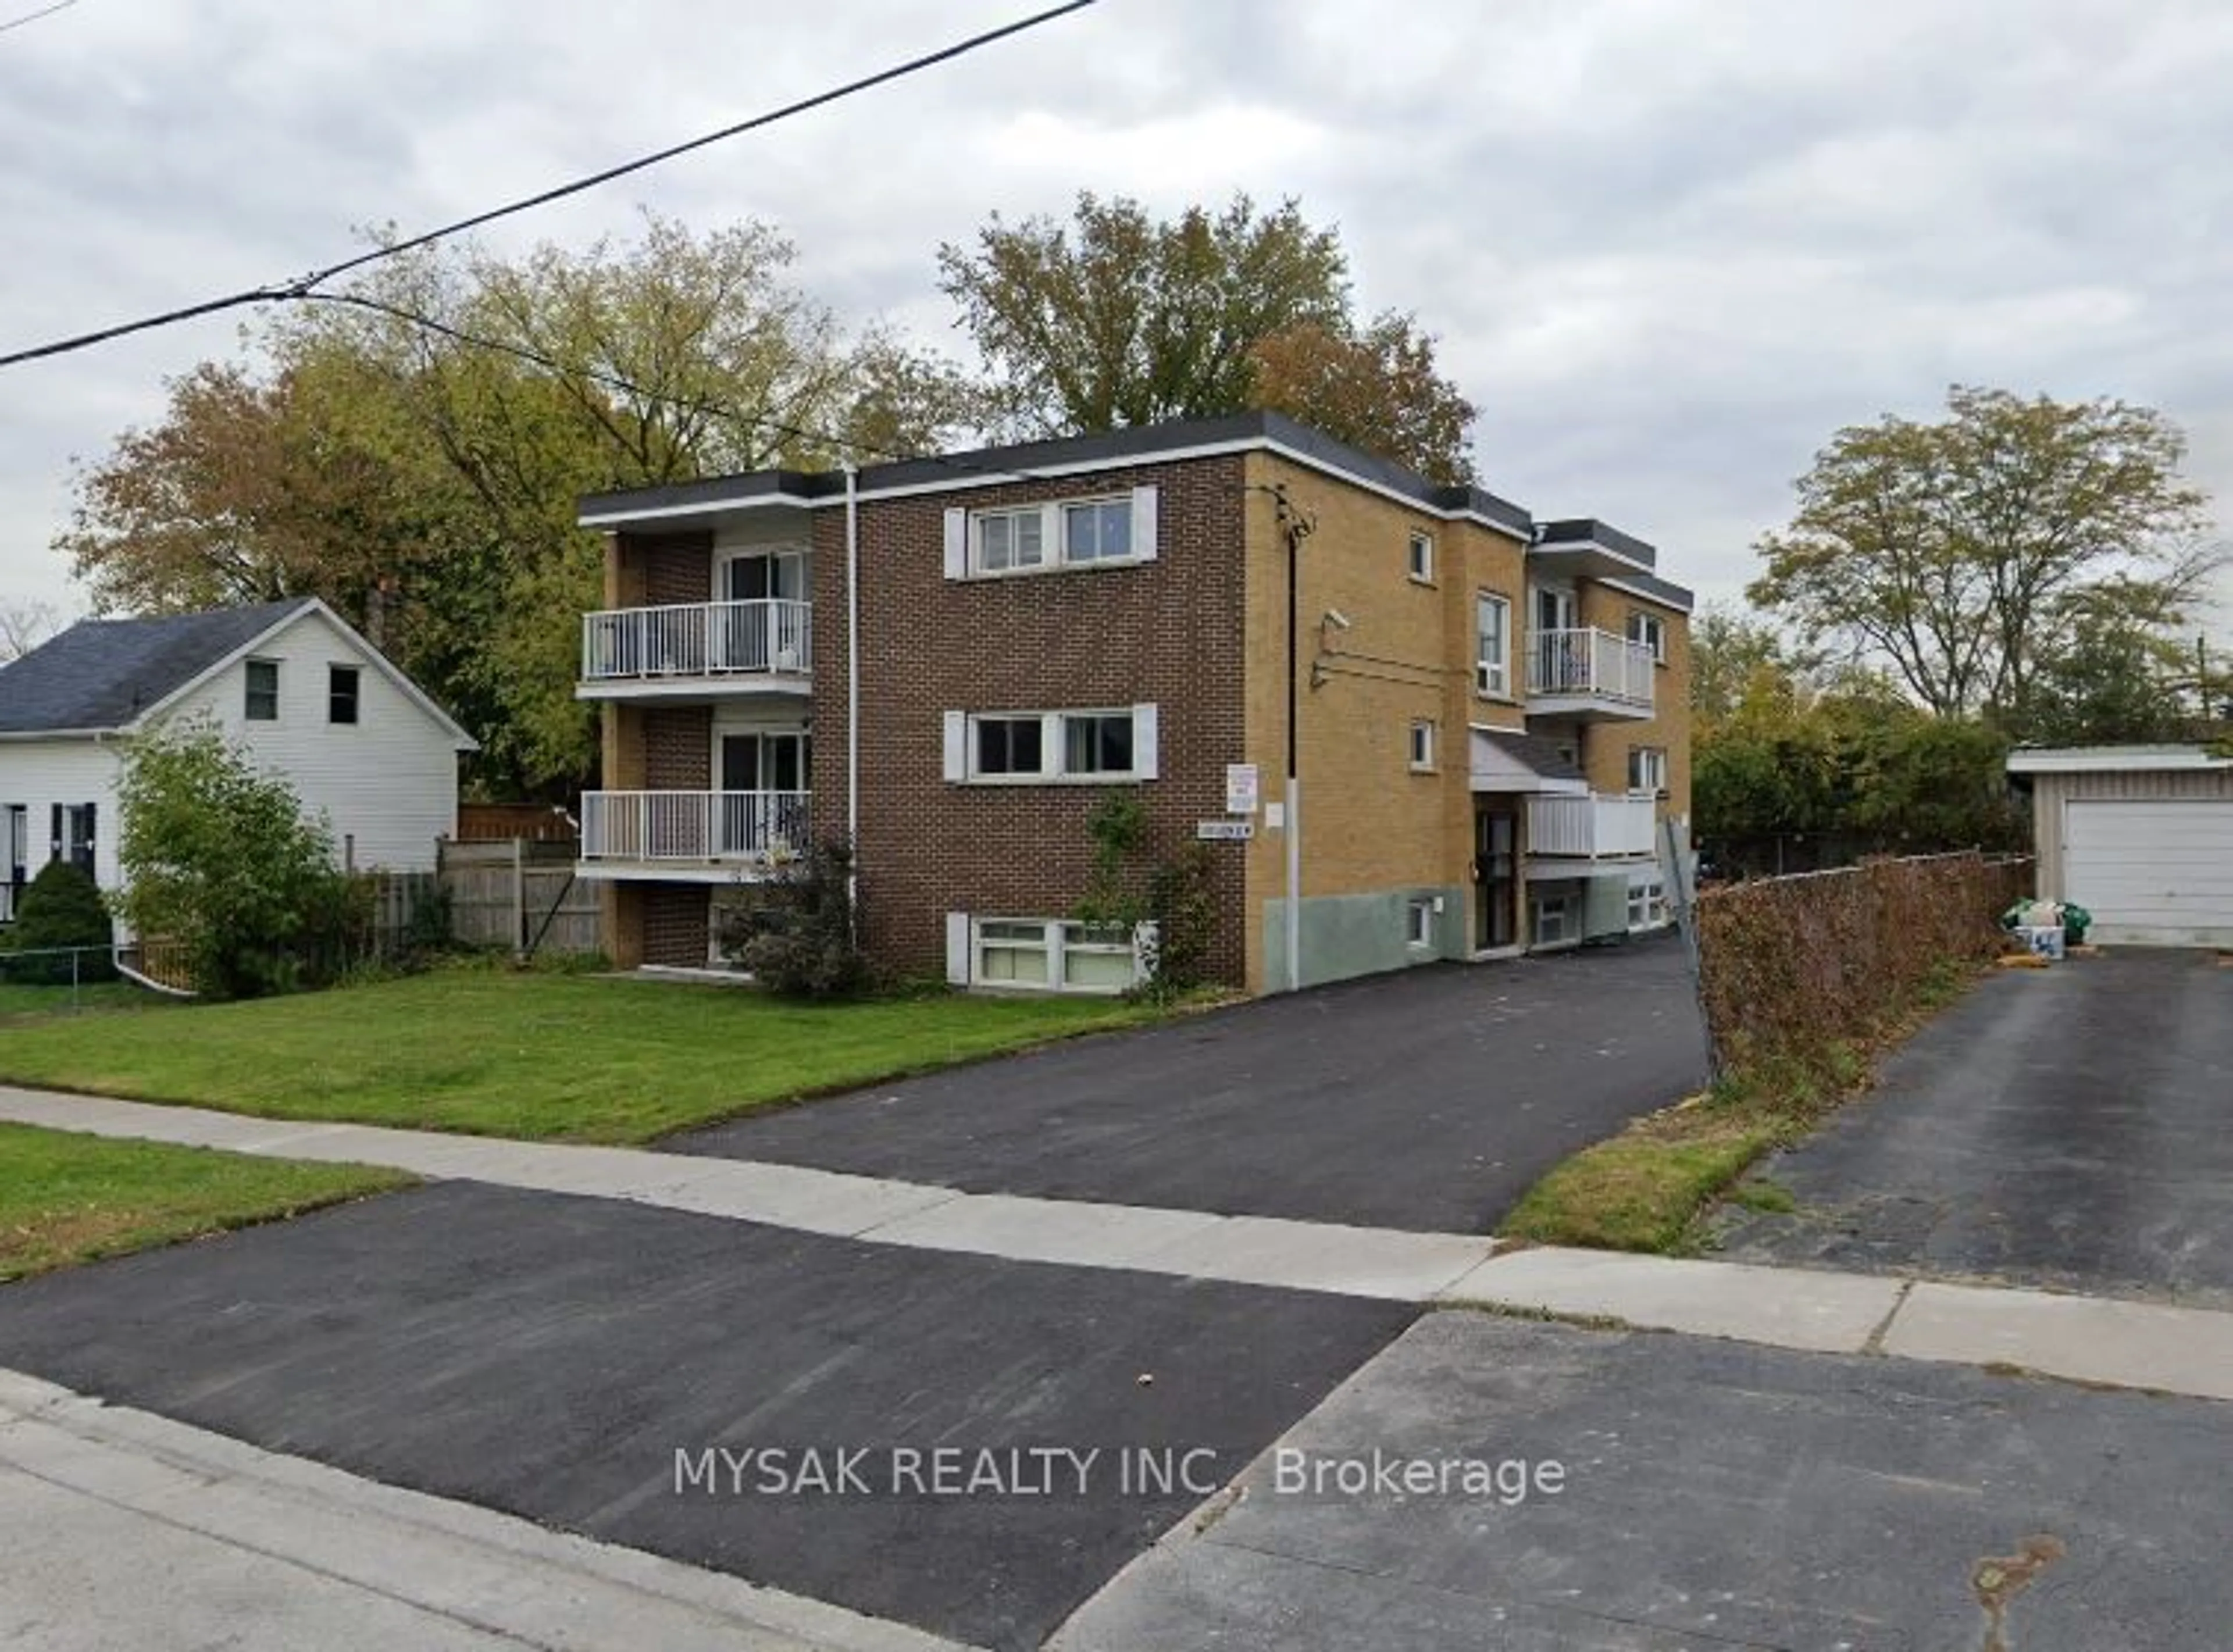 A pic from exterior of the house or condo for 321 Elgin St, Oshawa Ontario L1J 2P2